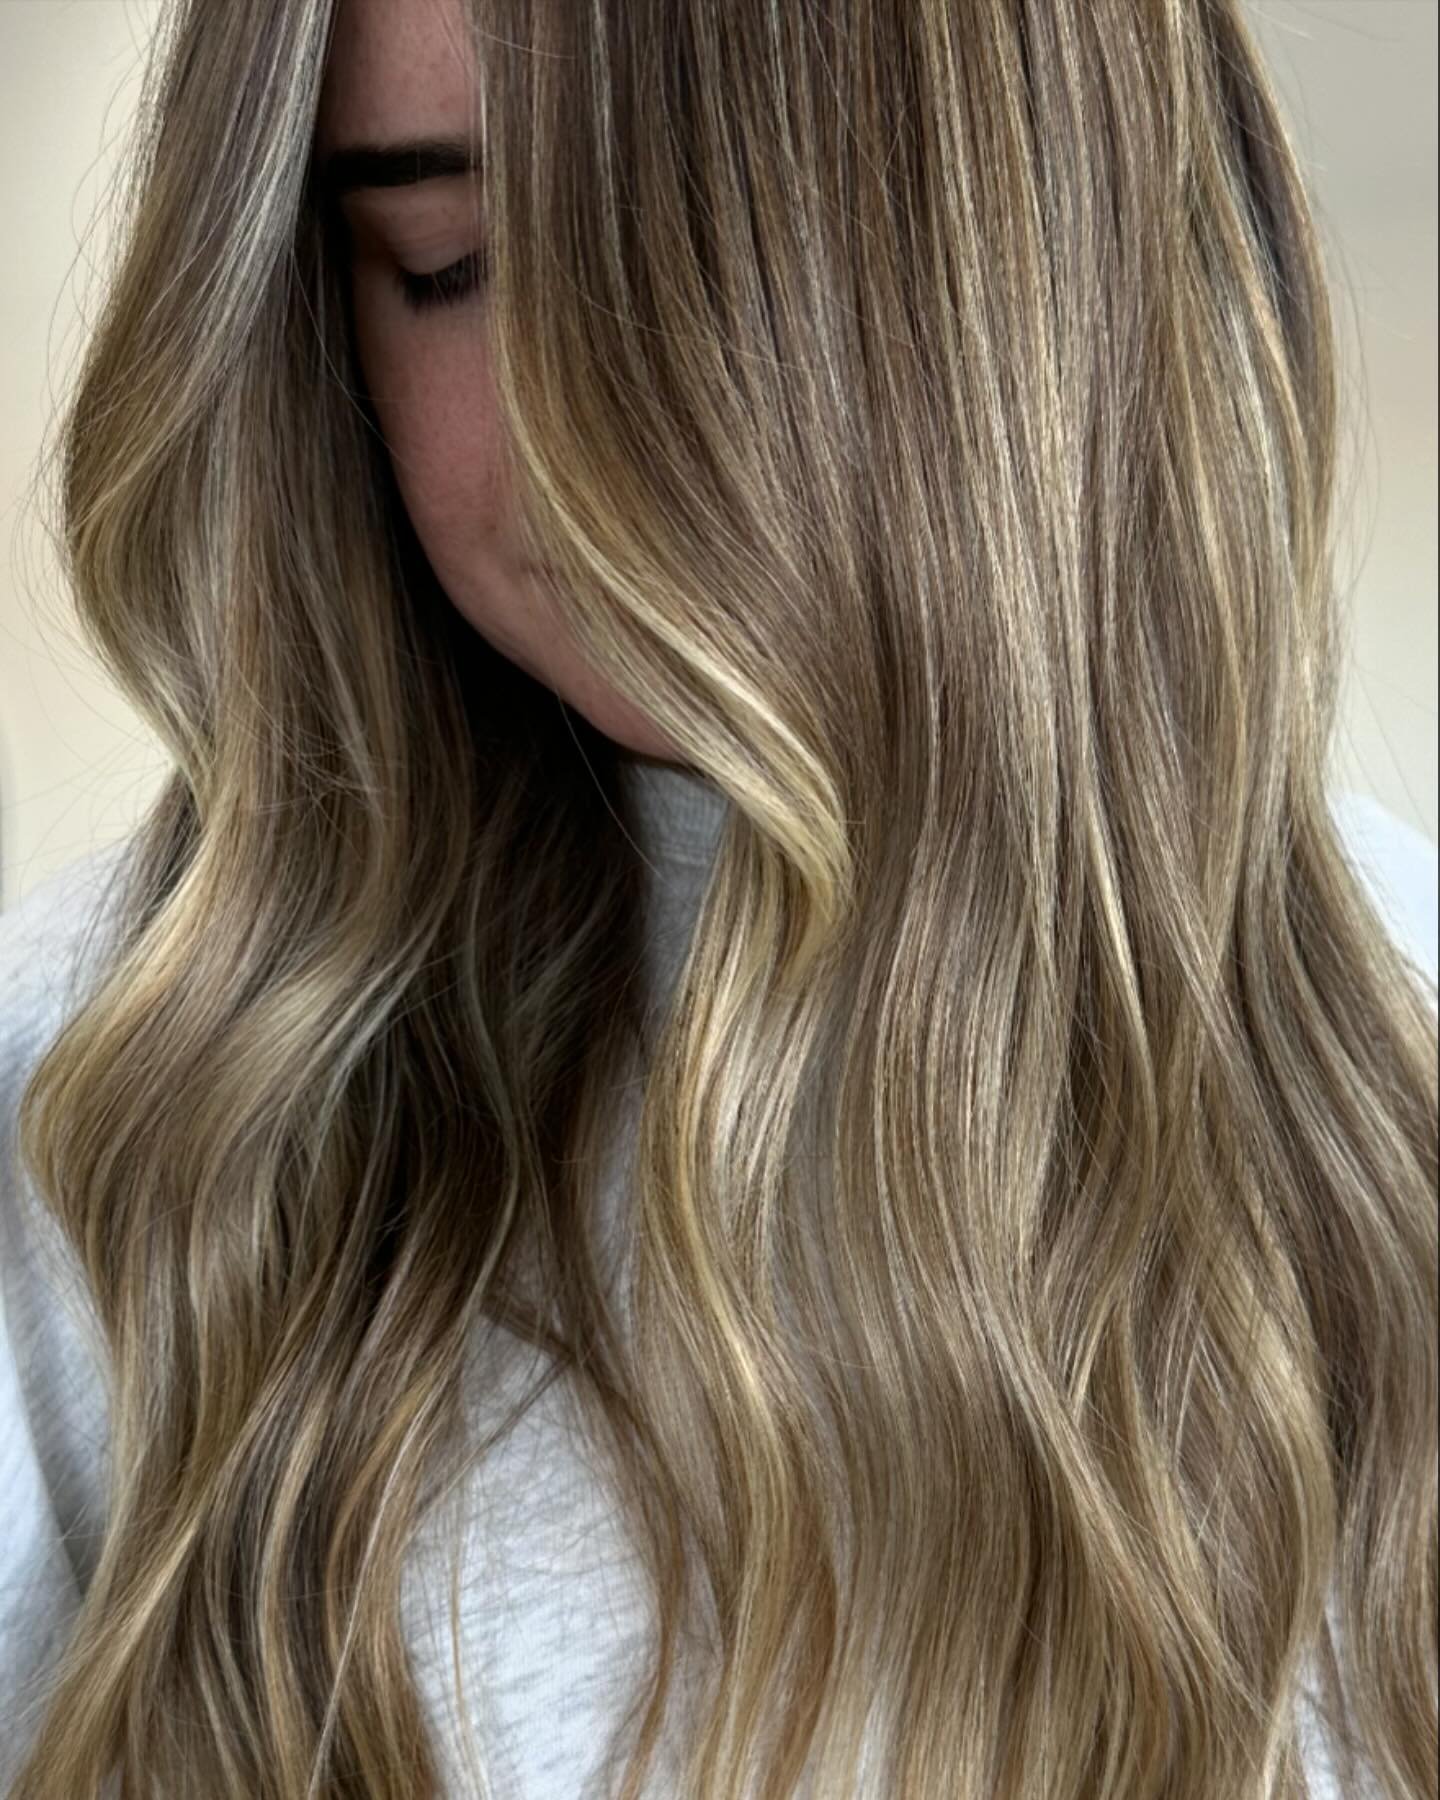 The hair we are all dreaming of&hellip;Dimensional Bronde! 

Putting depth &amp; beautiful tones back into colour 😮&zwj;💨

#HairByRav #HairStylist #HairTrends #HairGoals
#BlondeGoals #BlondeHair #BlondeInspo #HairInspo #SydneyHairstylist #NorthCurl